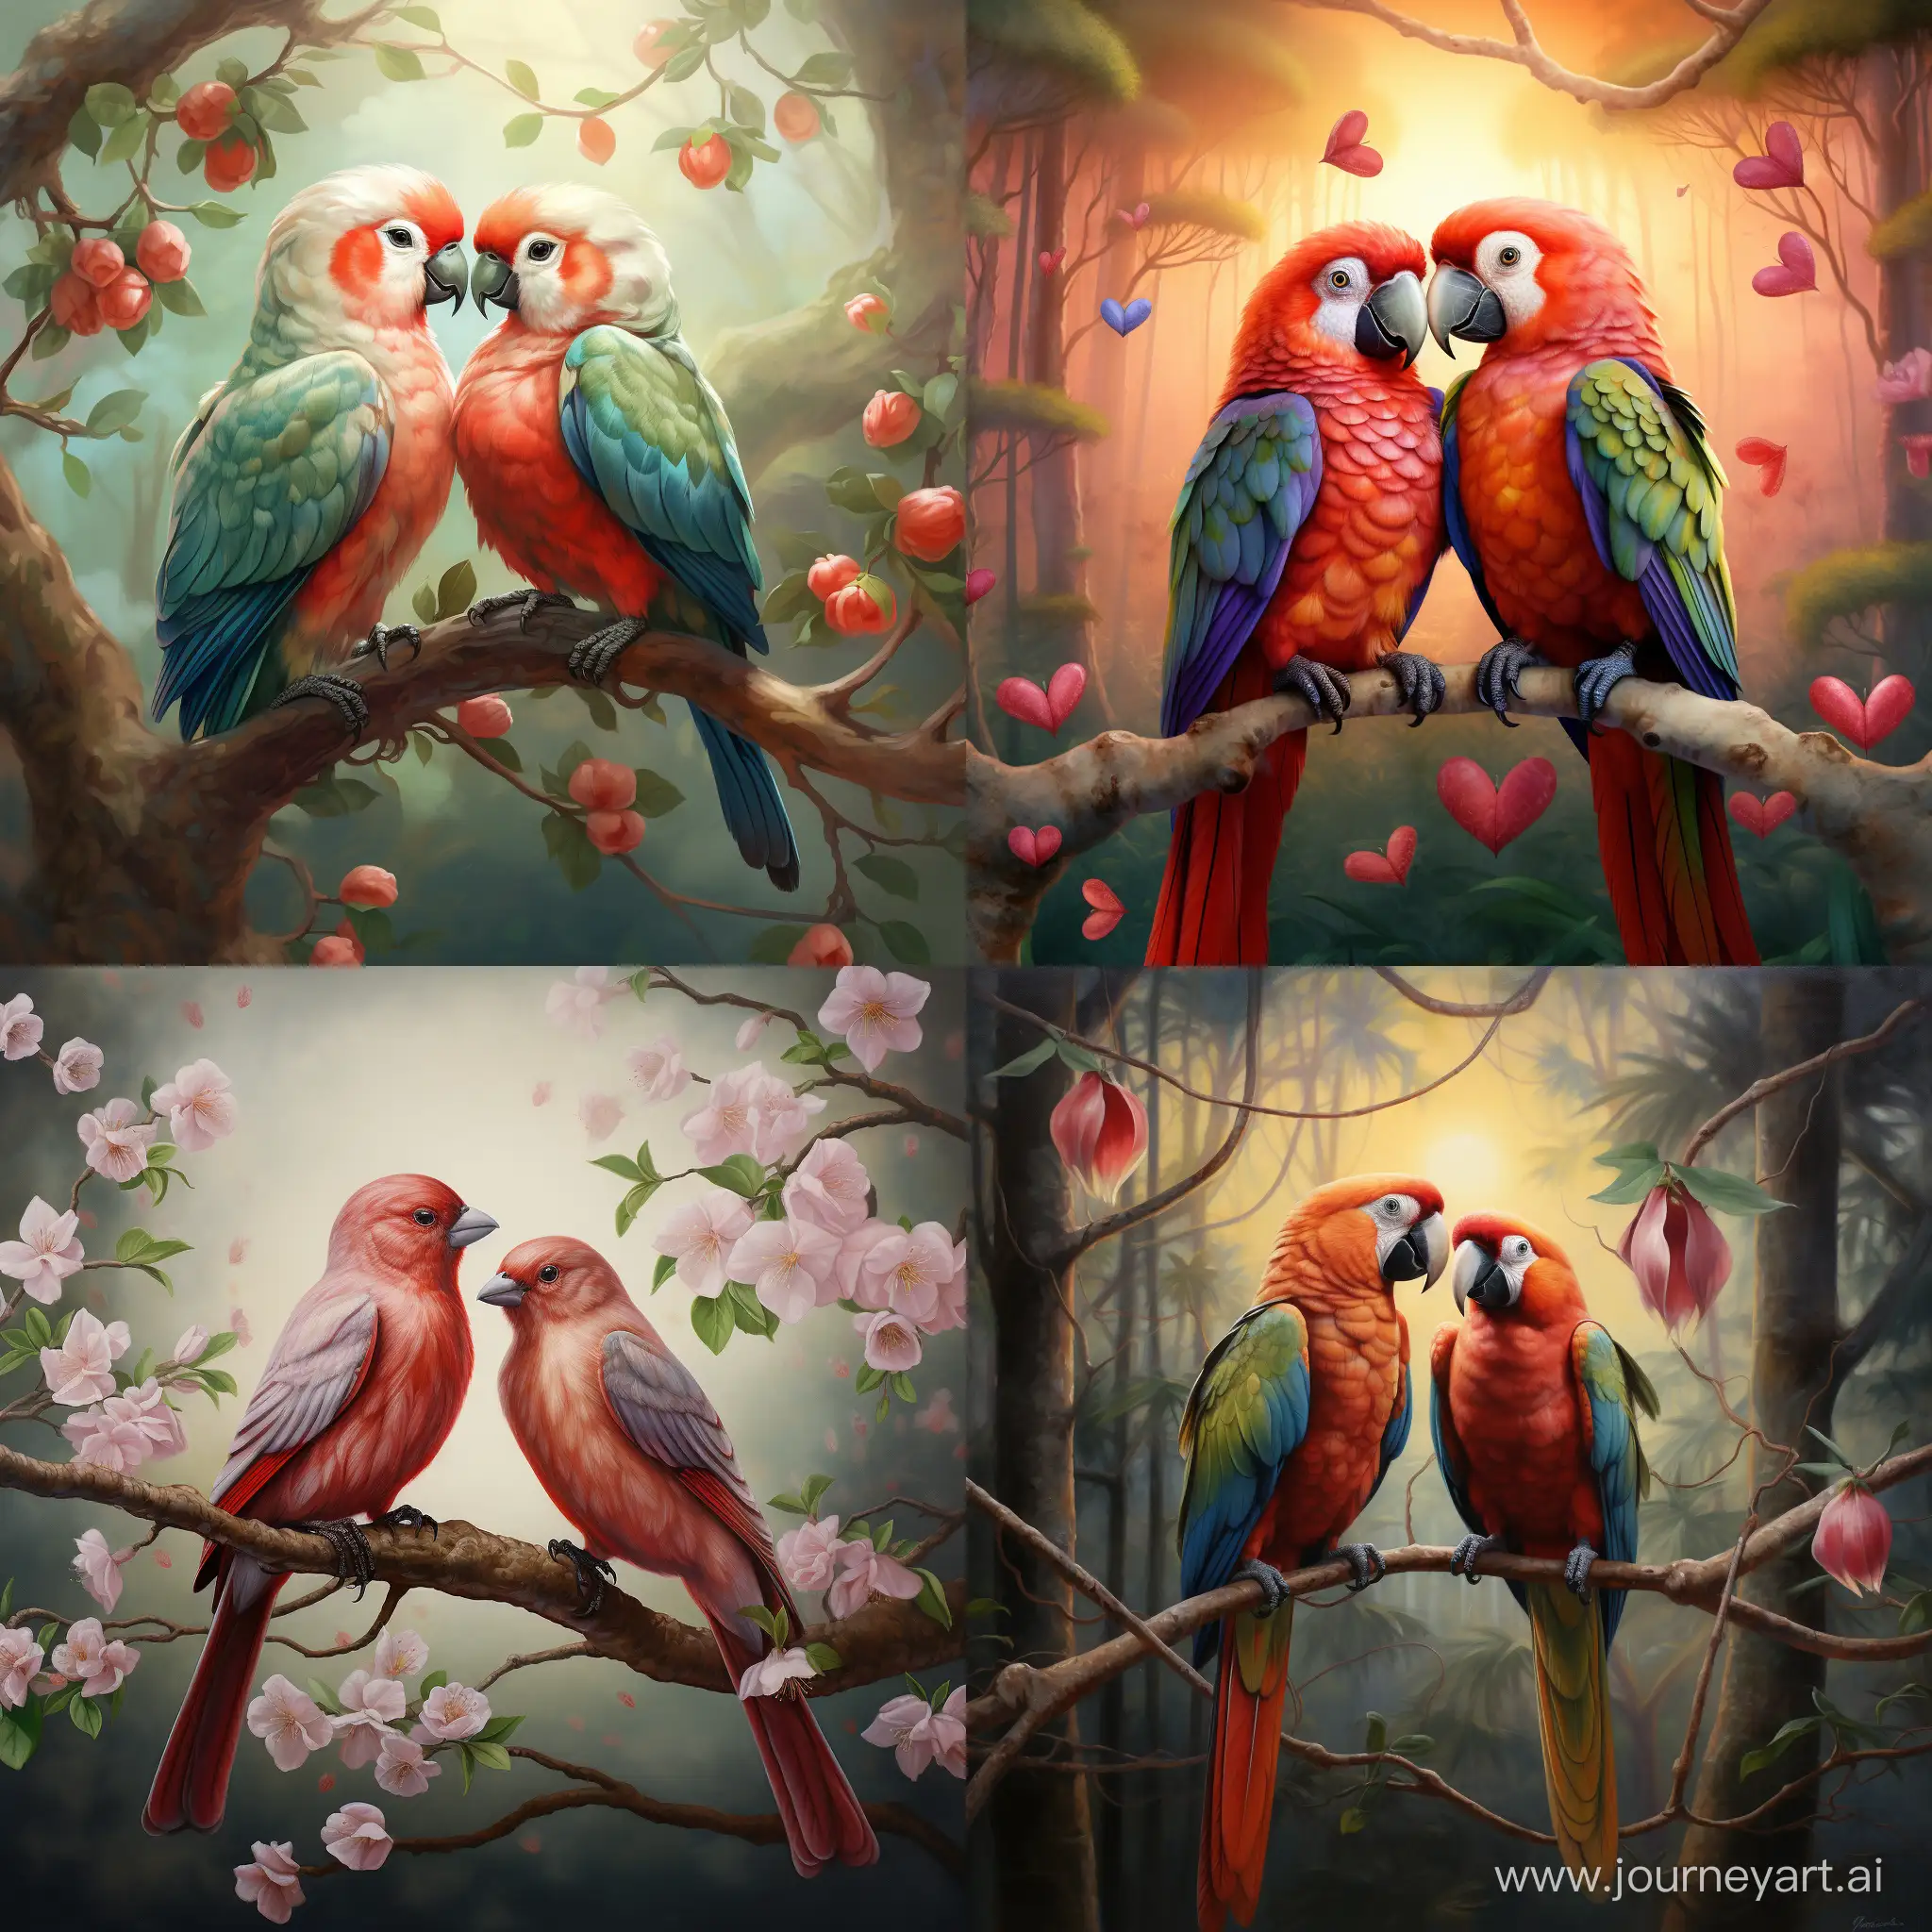 Romantic-Love-Birds-on-a-Branch-in-Artistic-Square-Format